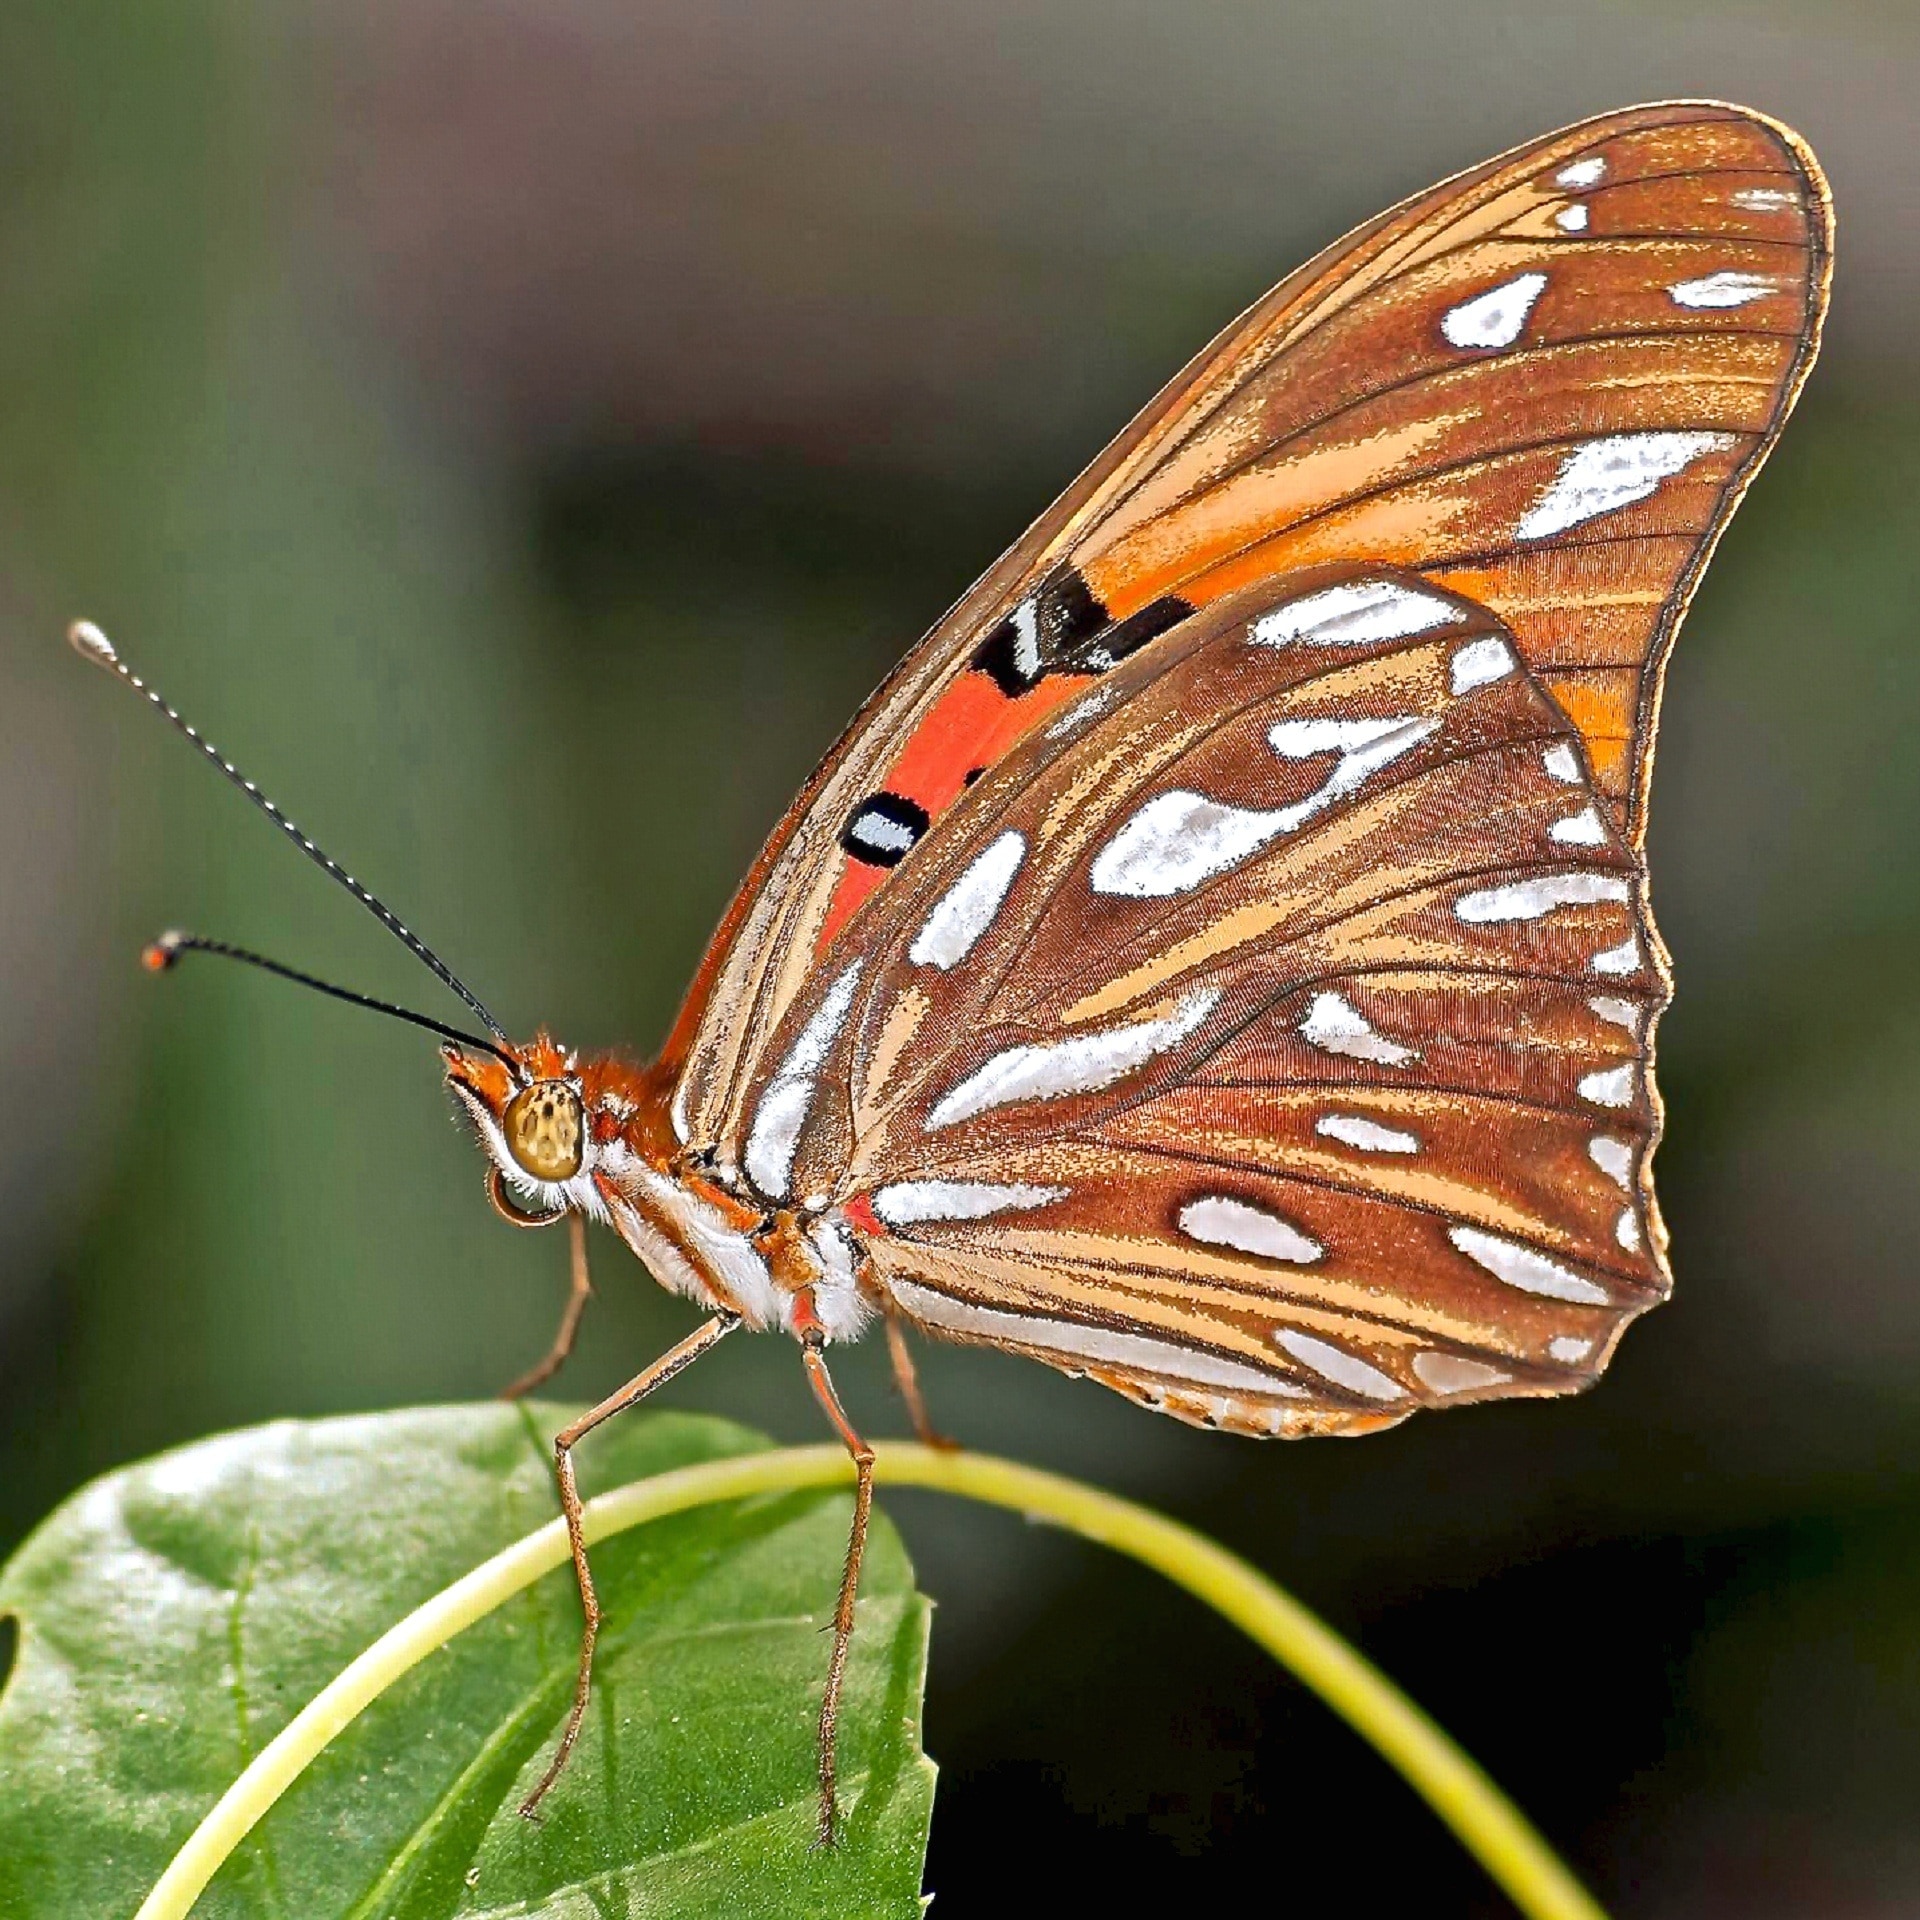 Gulf Fritillary, Butterfly, one animal, butterfly - insect